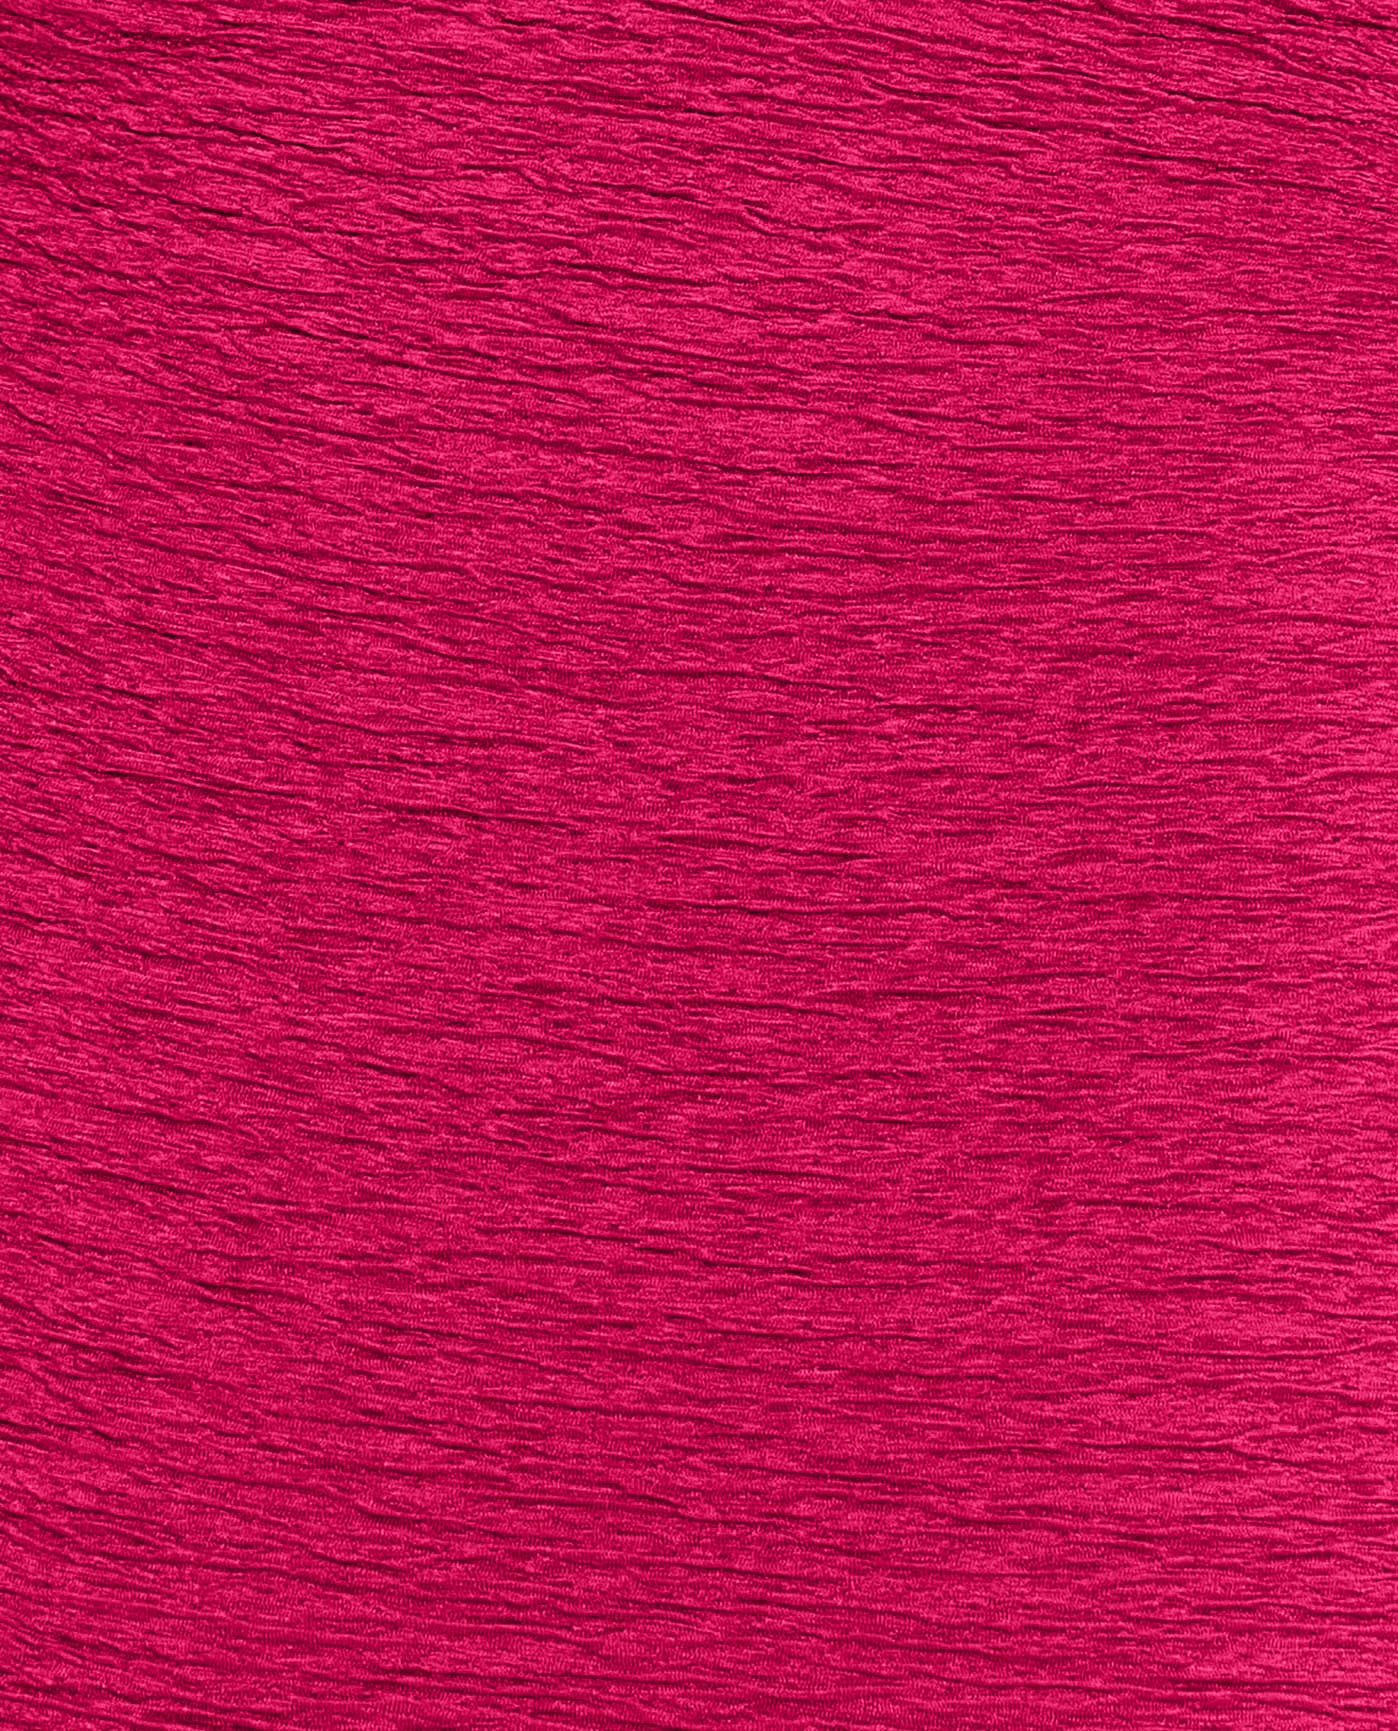 FABRIC SWATCH VIEW OF CHLORINE RESISTANT KRINKLE TEXTURED SOLID HIGH NECK PLUS SIZE ONE PIECE | KRINKLE BERRY 2022